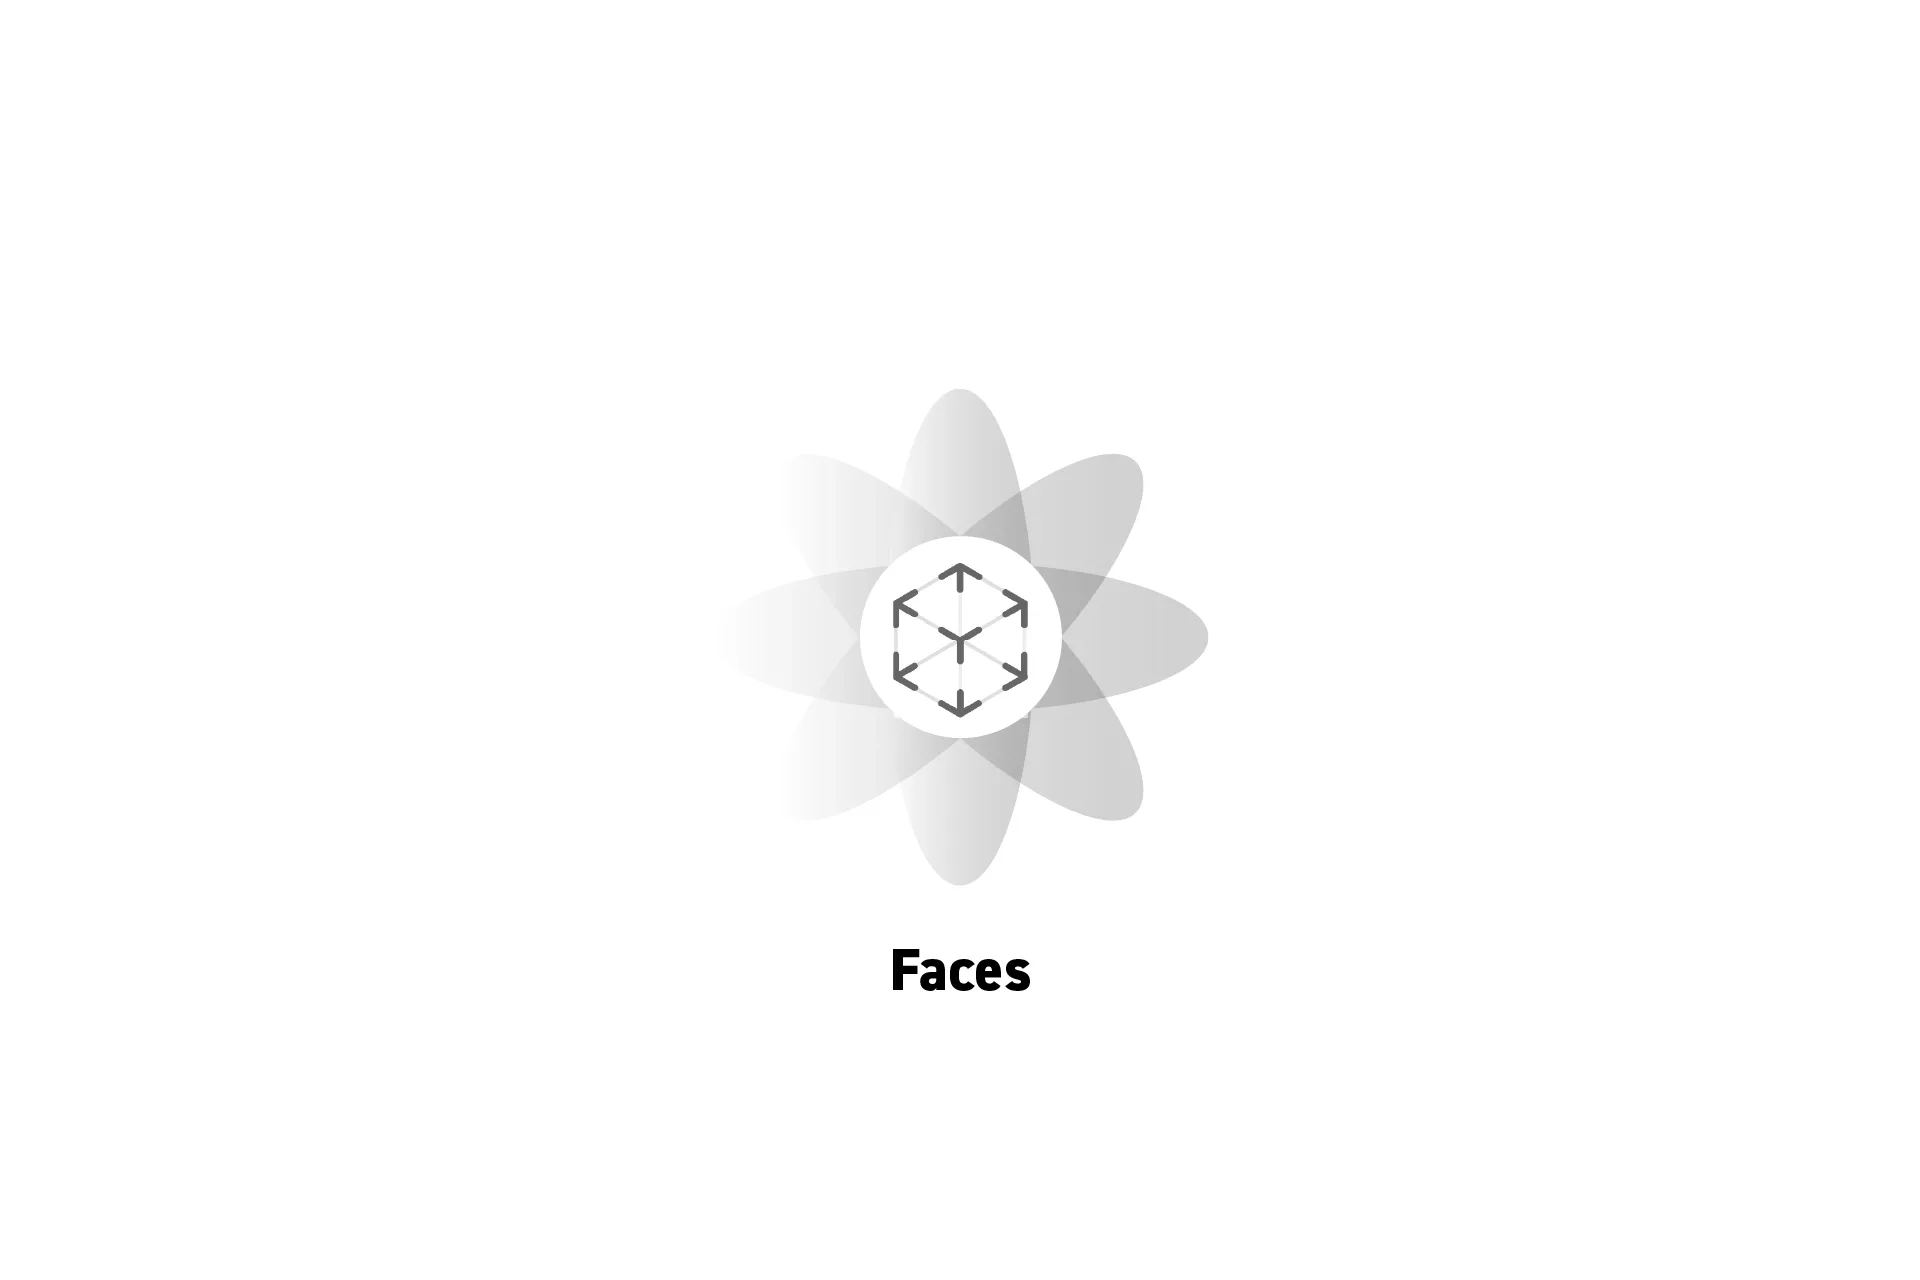 A flower that represents spatial computing with the text "Faces" beneath it.